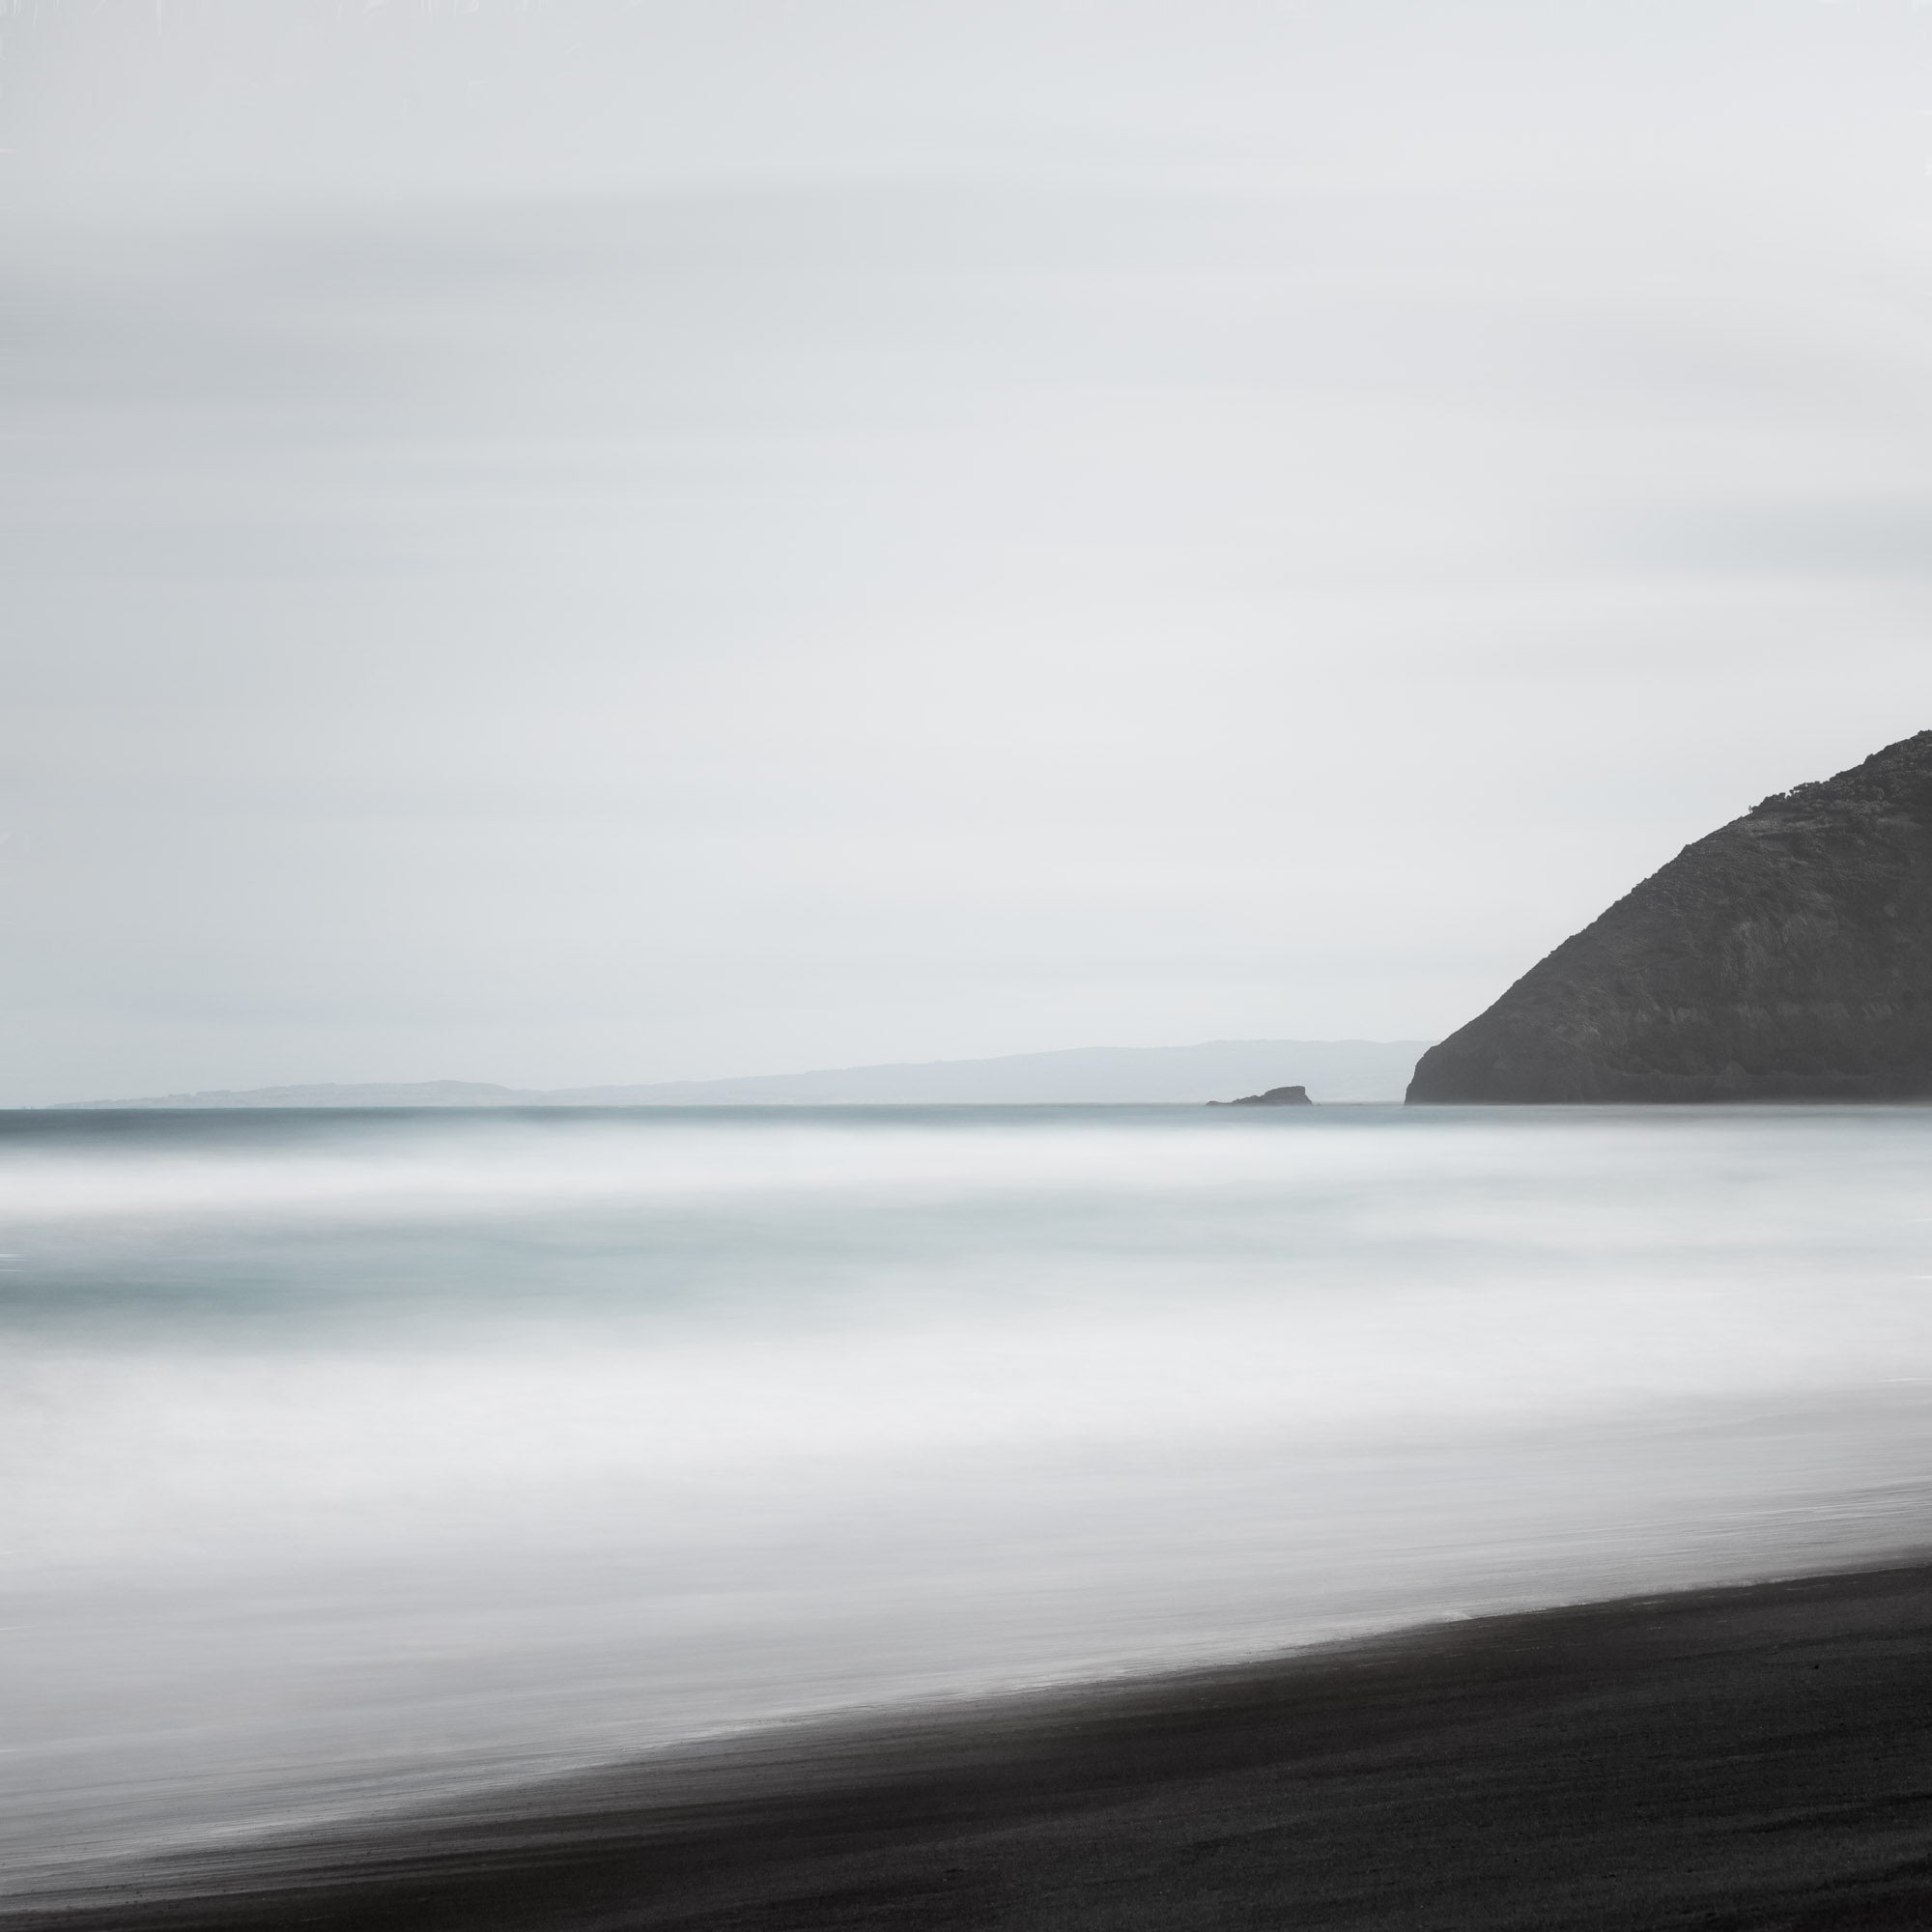 A minimalist long exposure photo of the calm sea meeting the dark sands of St. Clair's Beach in New Zealand, with a headland silhouette on the right.